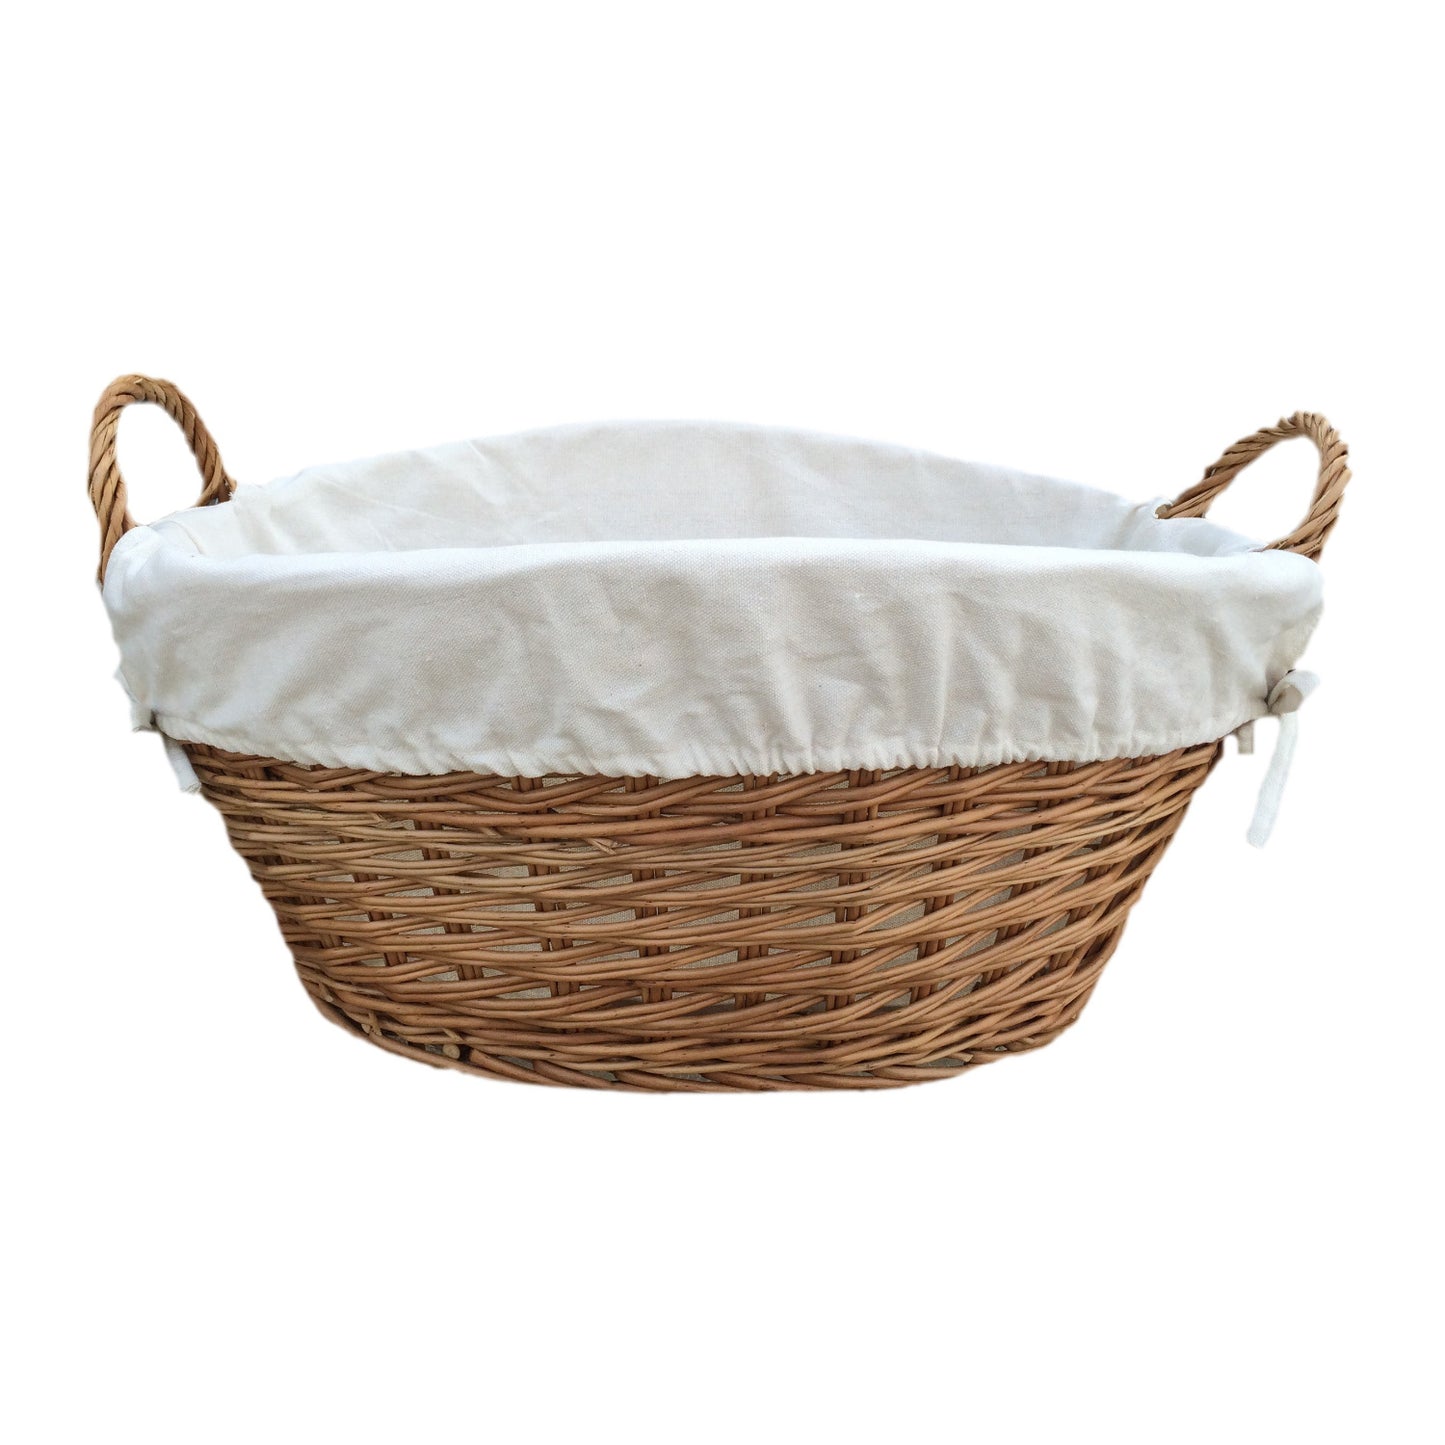 Light Steamed Wash Basket With White Lining